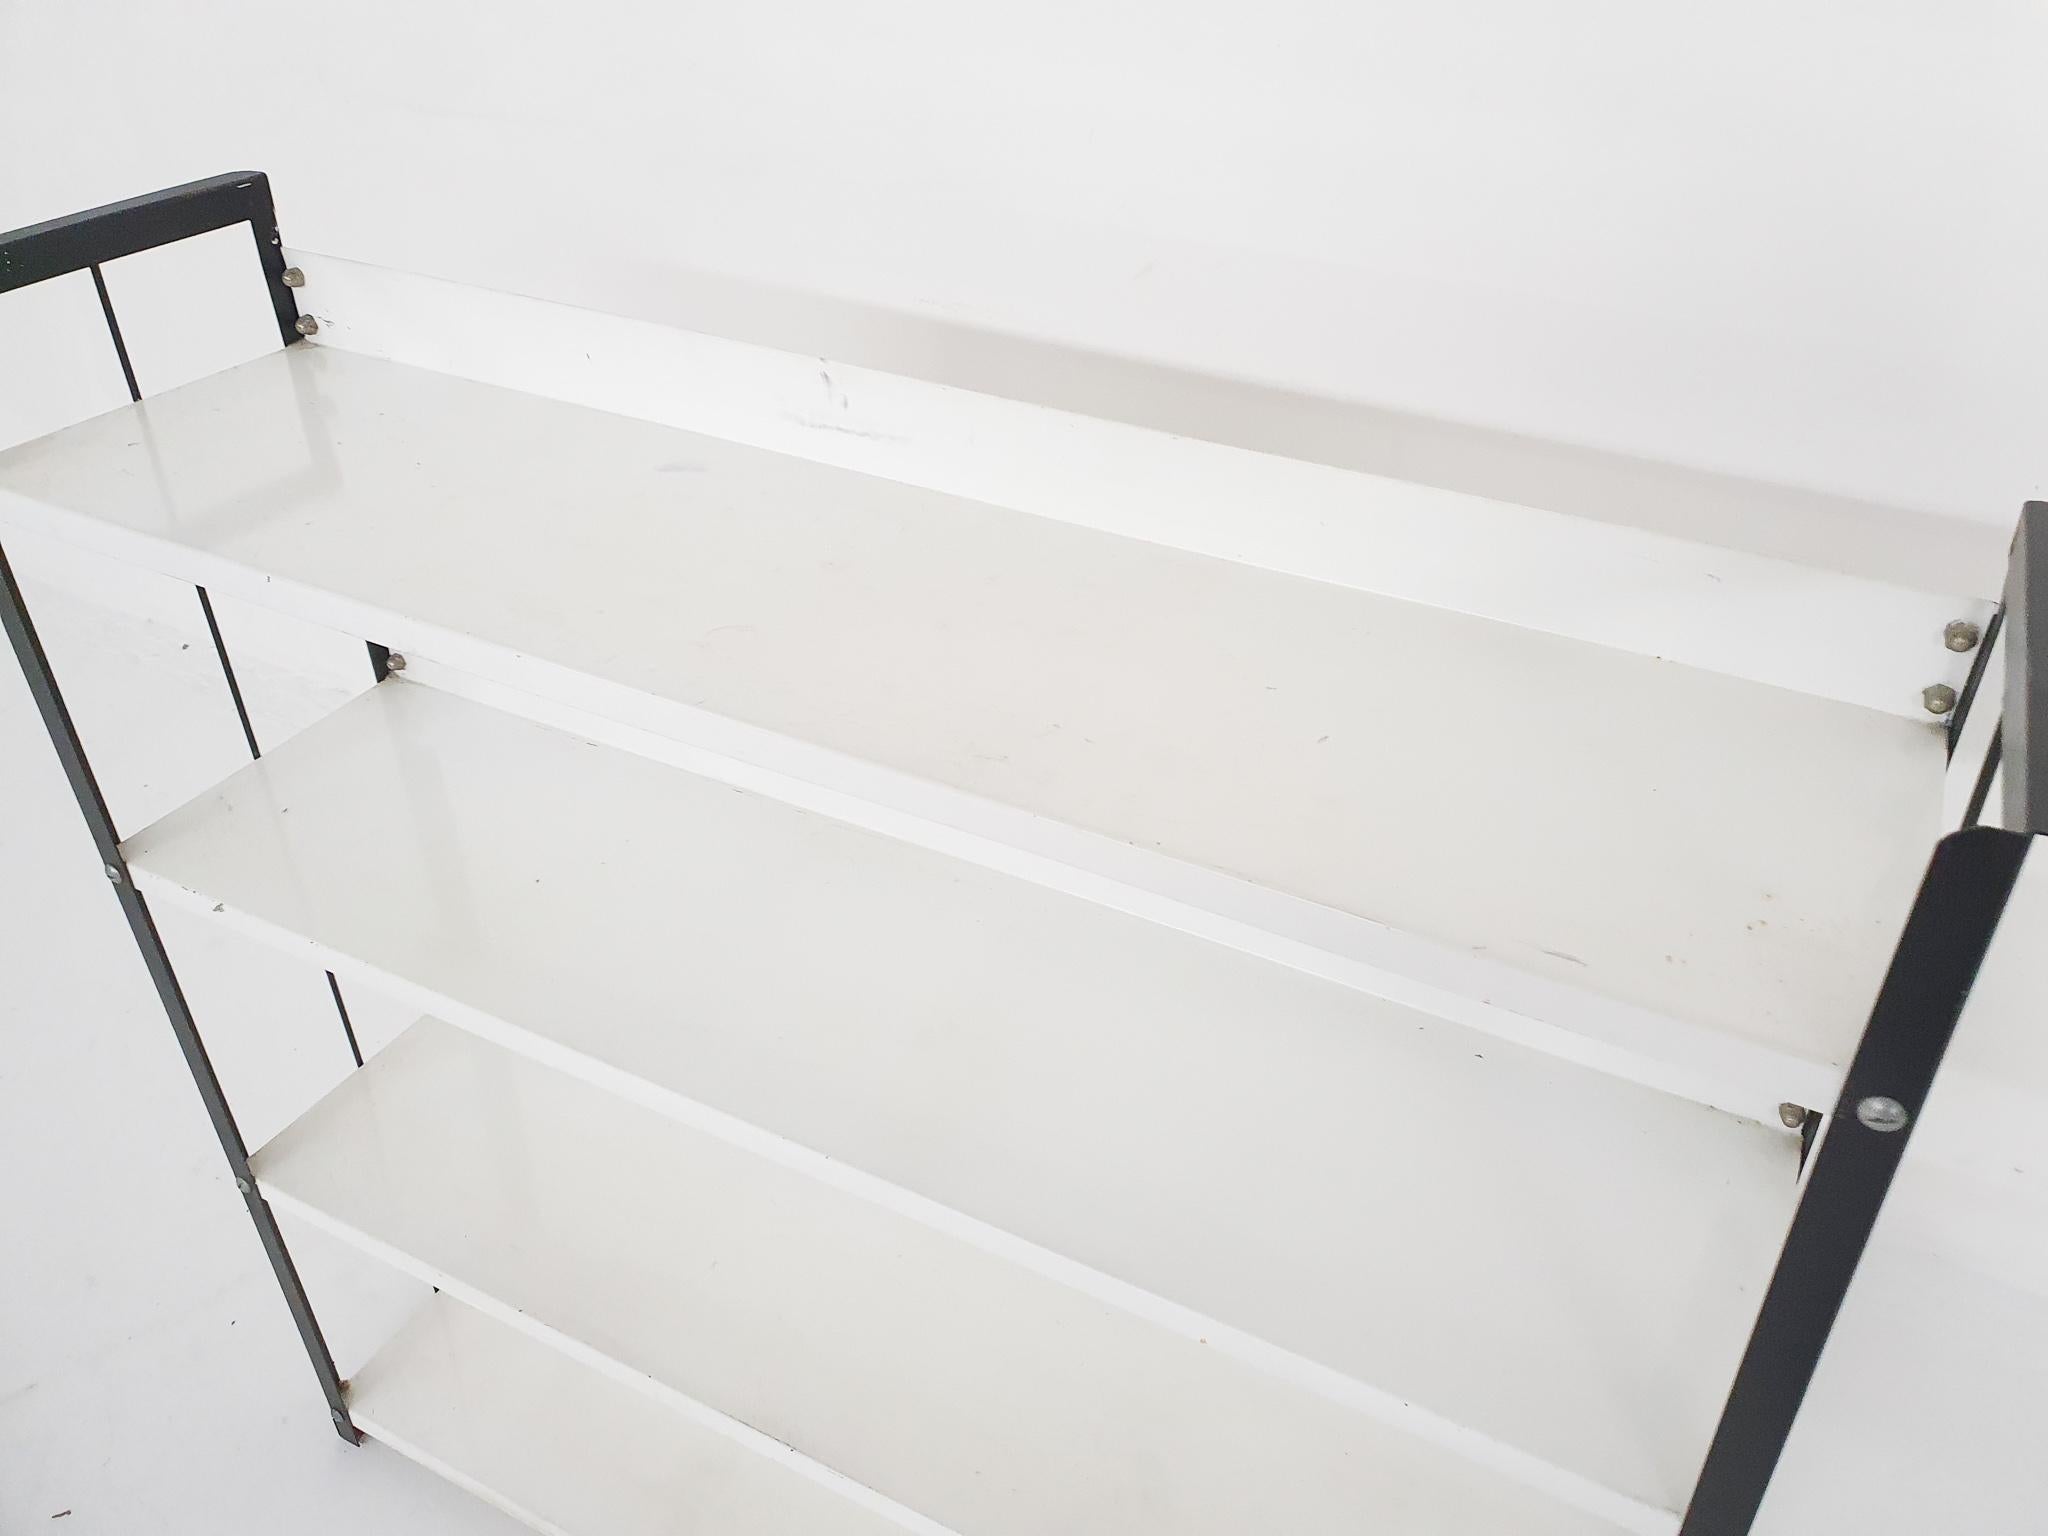 Black and White Metal Book Shelves Attrb. to Tomado, Holland, 1950's For Sale 2